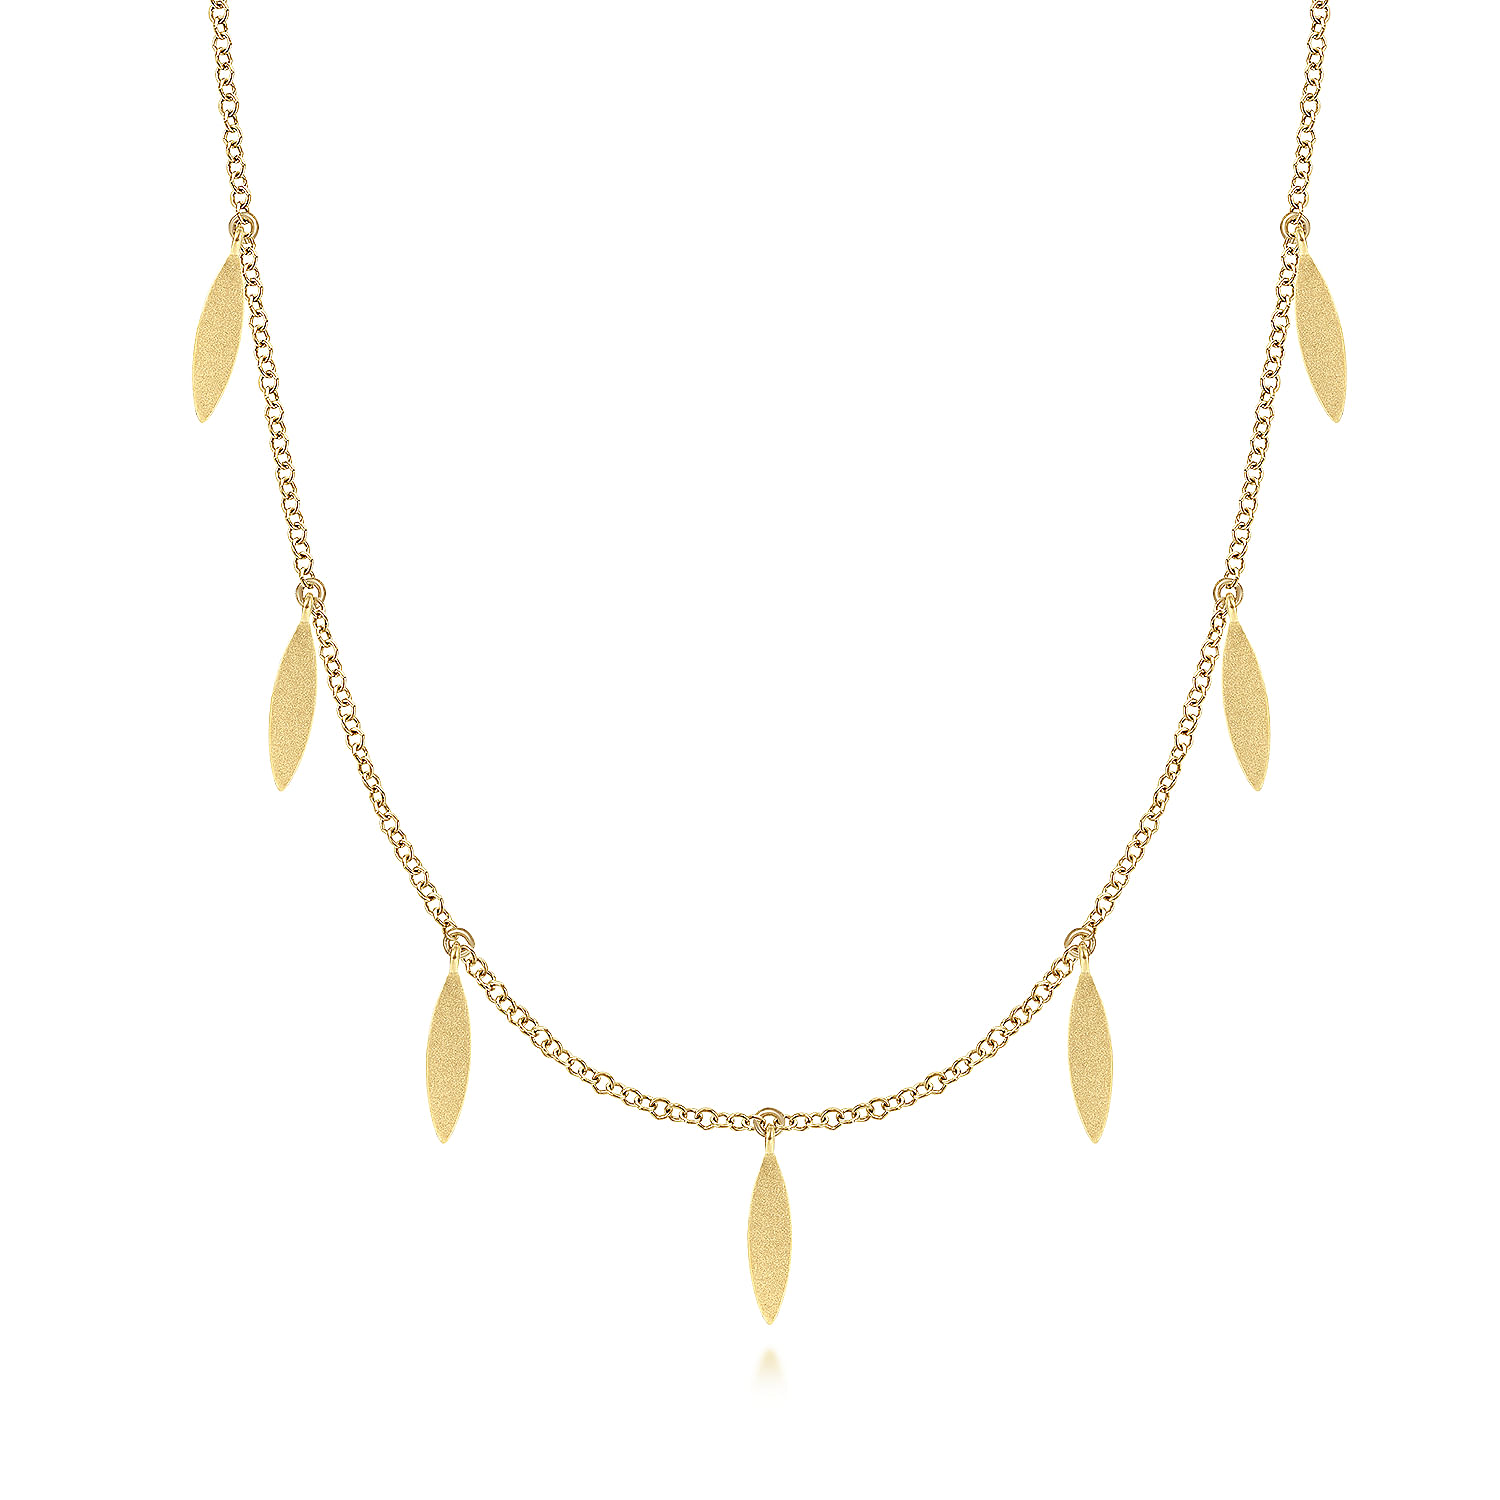 Gabriel - 24 inch 14K Yellow Gold Chain Necklace with Marquise Shaped Drops